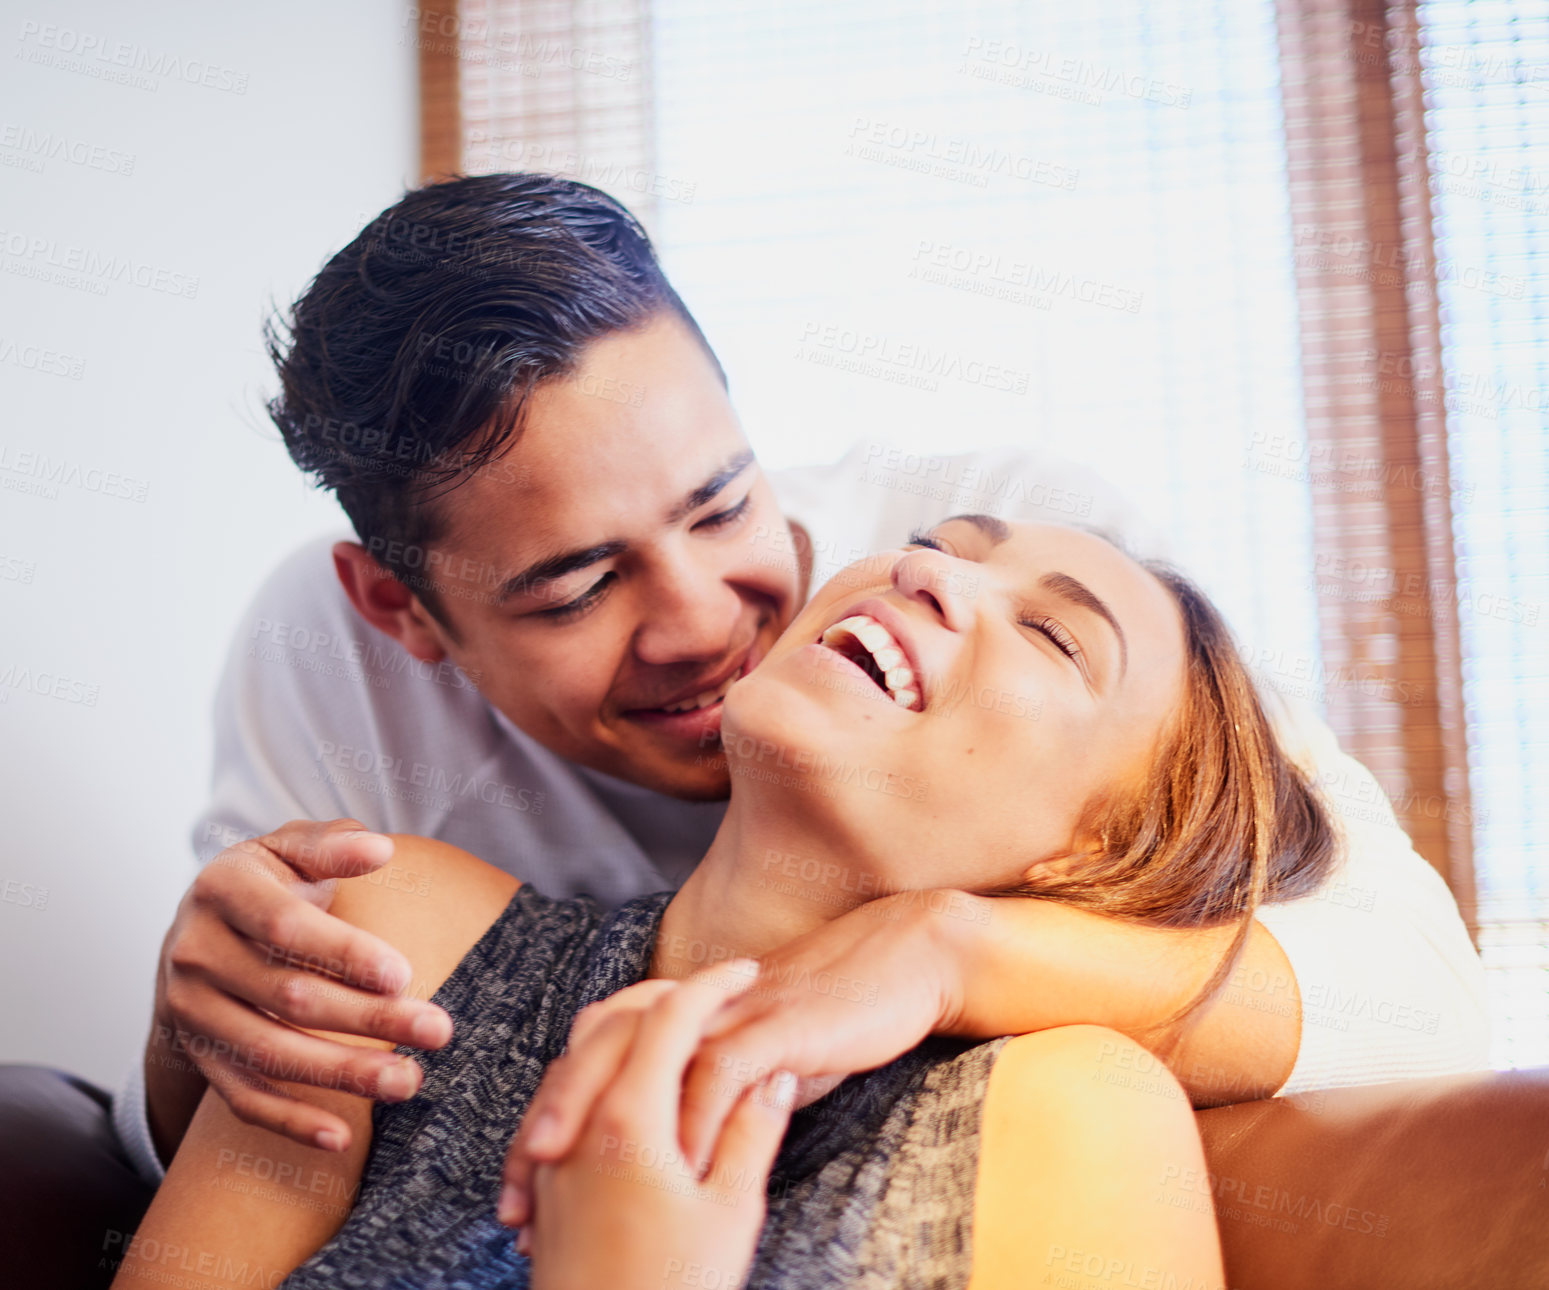 Buy stock photo Shot of a laughing young couple sharing a moment together at home